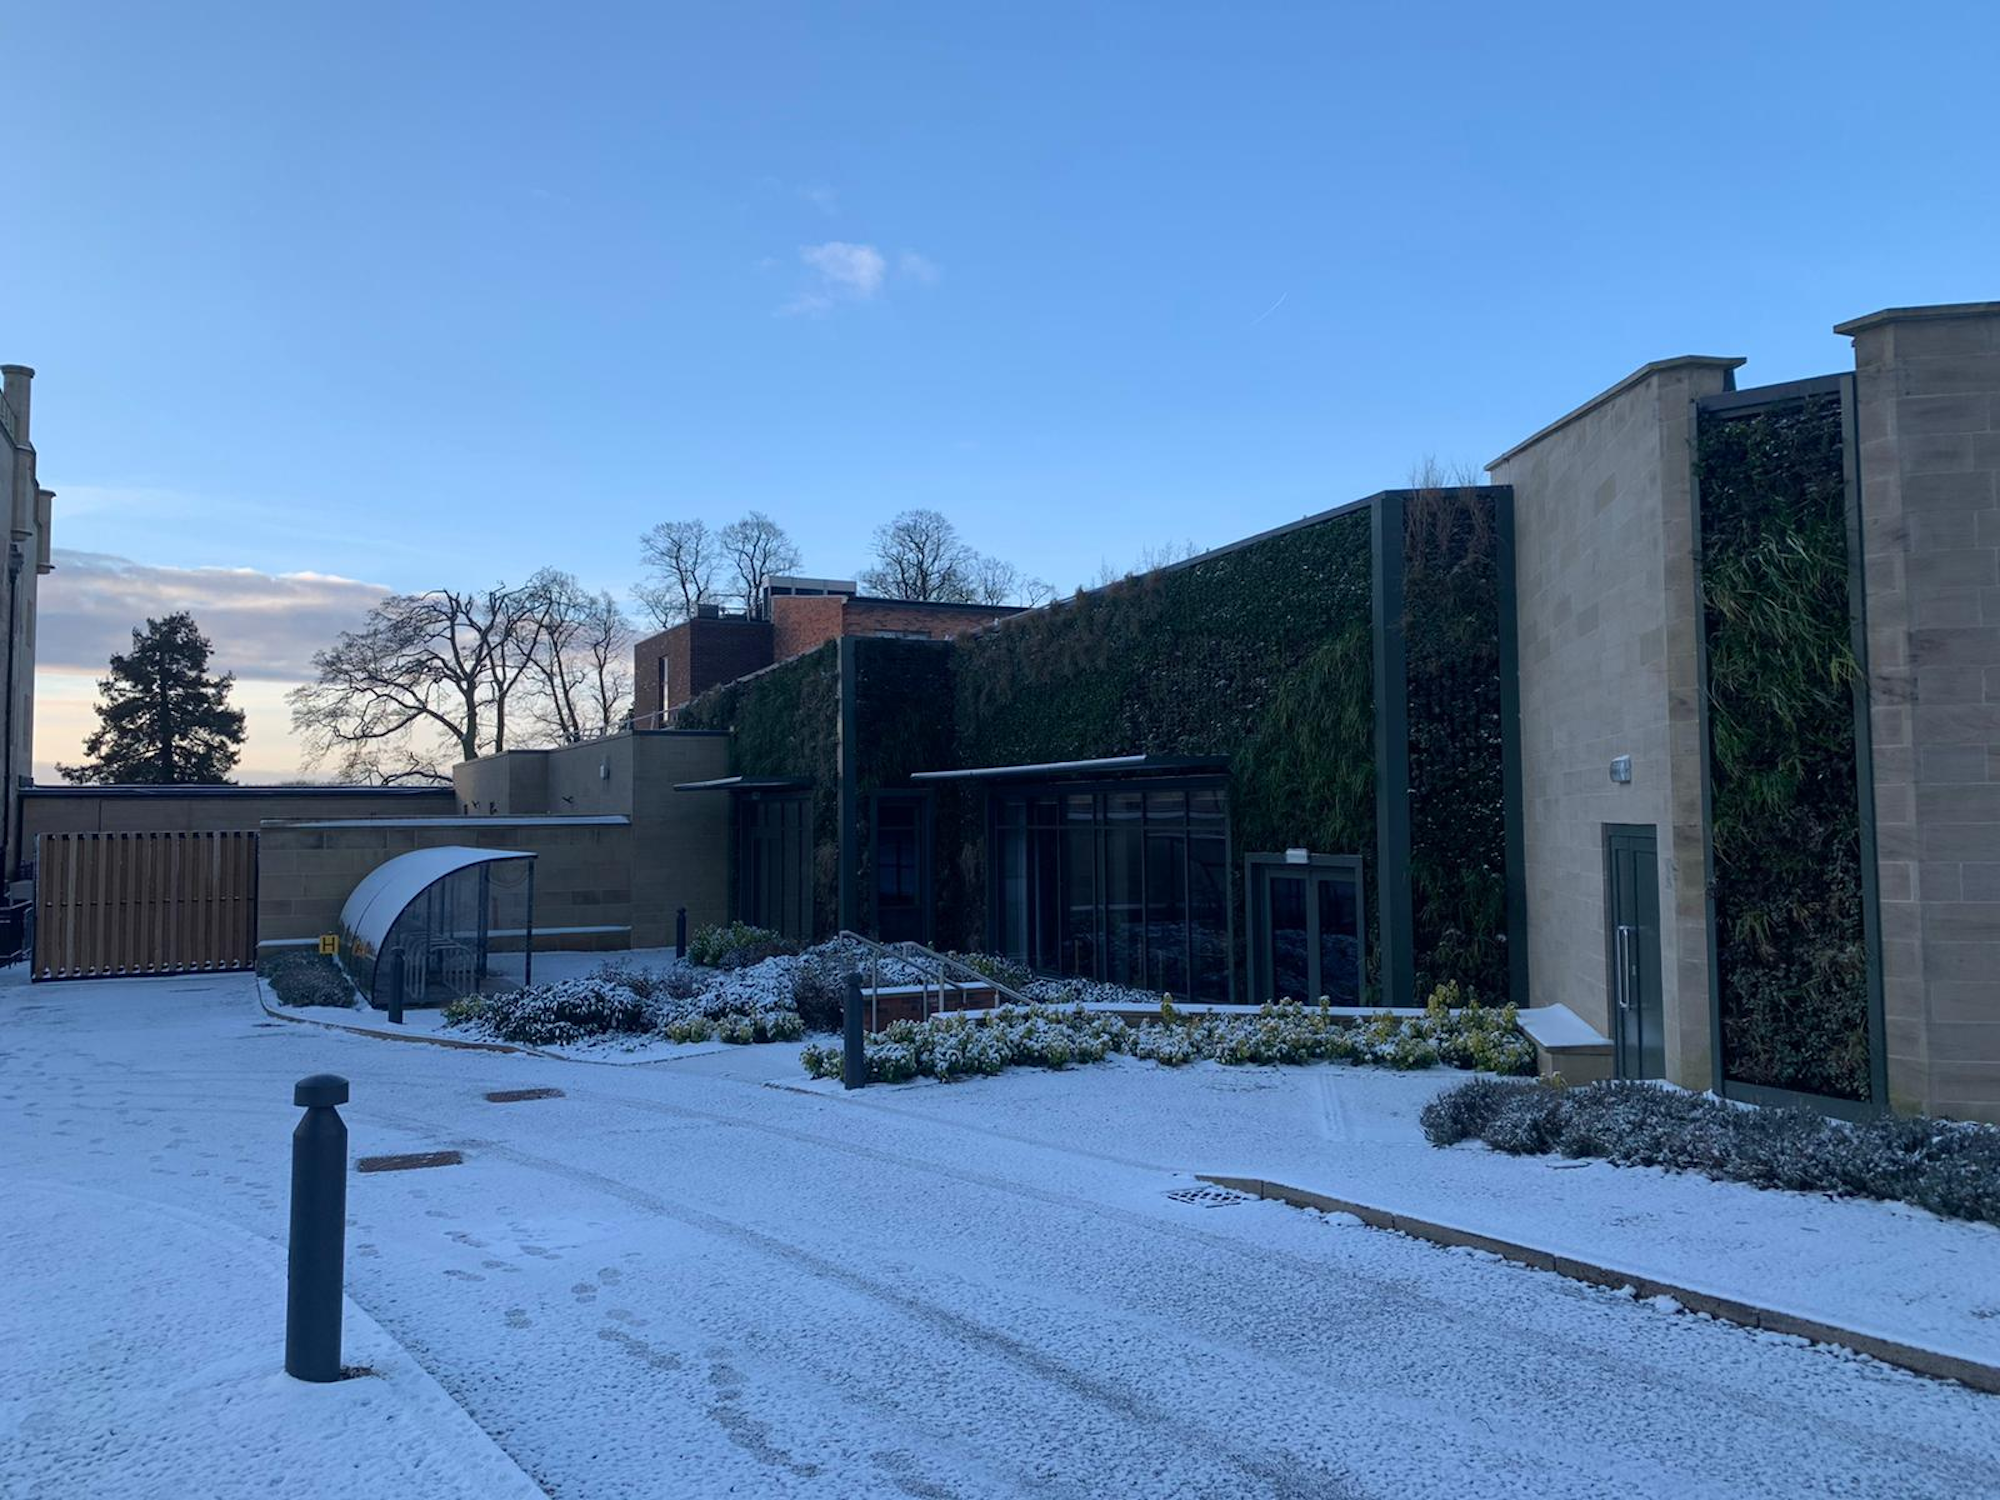 Living Walls At Studley Castle Hotel In The Snow.